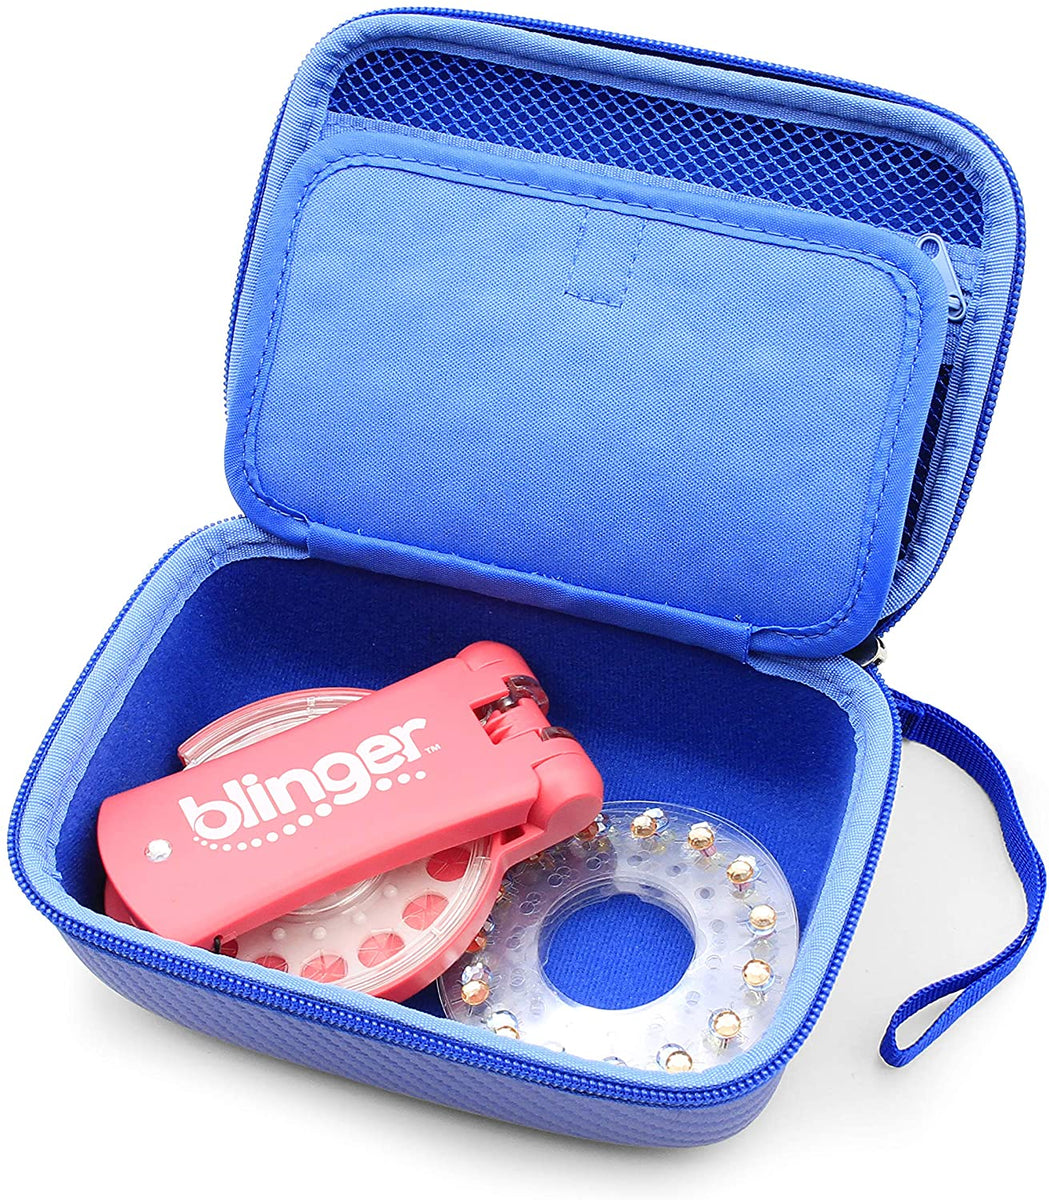  BOVKE Carrying Case for Blinger Ultimate Set Glam Collection  Dazzling Clear Gem Refill Blinger Deluxe Set Gems Bedazzler Kit with  Rhinestones Hair Gems Nail Jewels, Raspberry (Case Only) : Beauty 